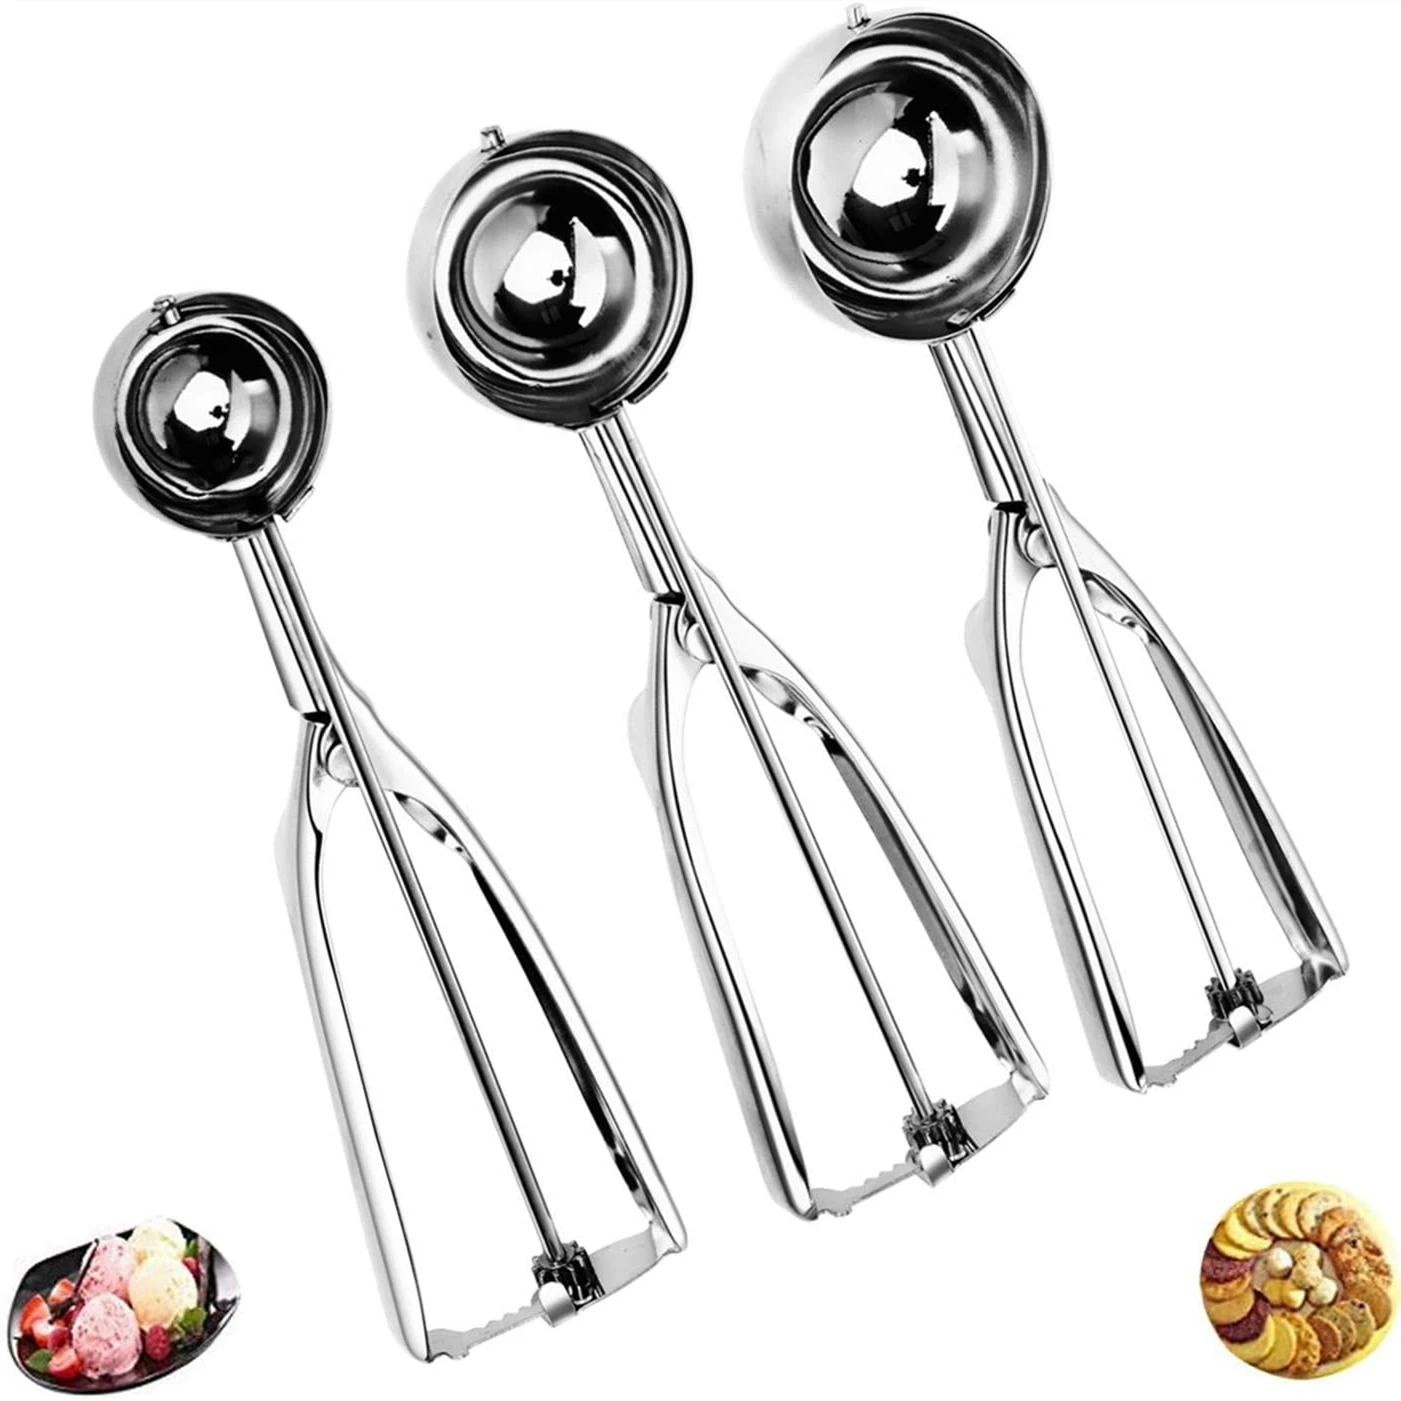 

2021 NEW Arrivals ice cream scoop sustainable stainless steel biscuit ice cream spoon, Silver